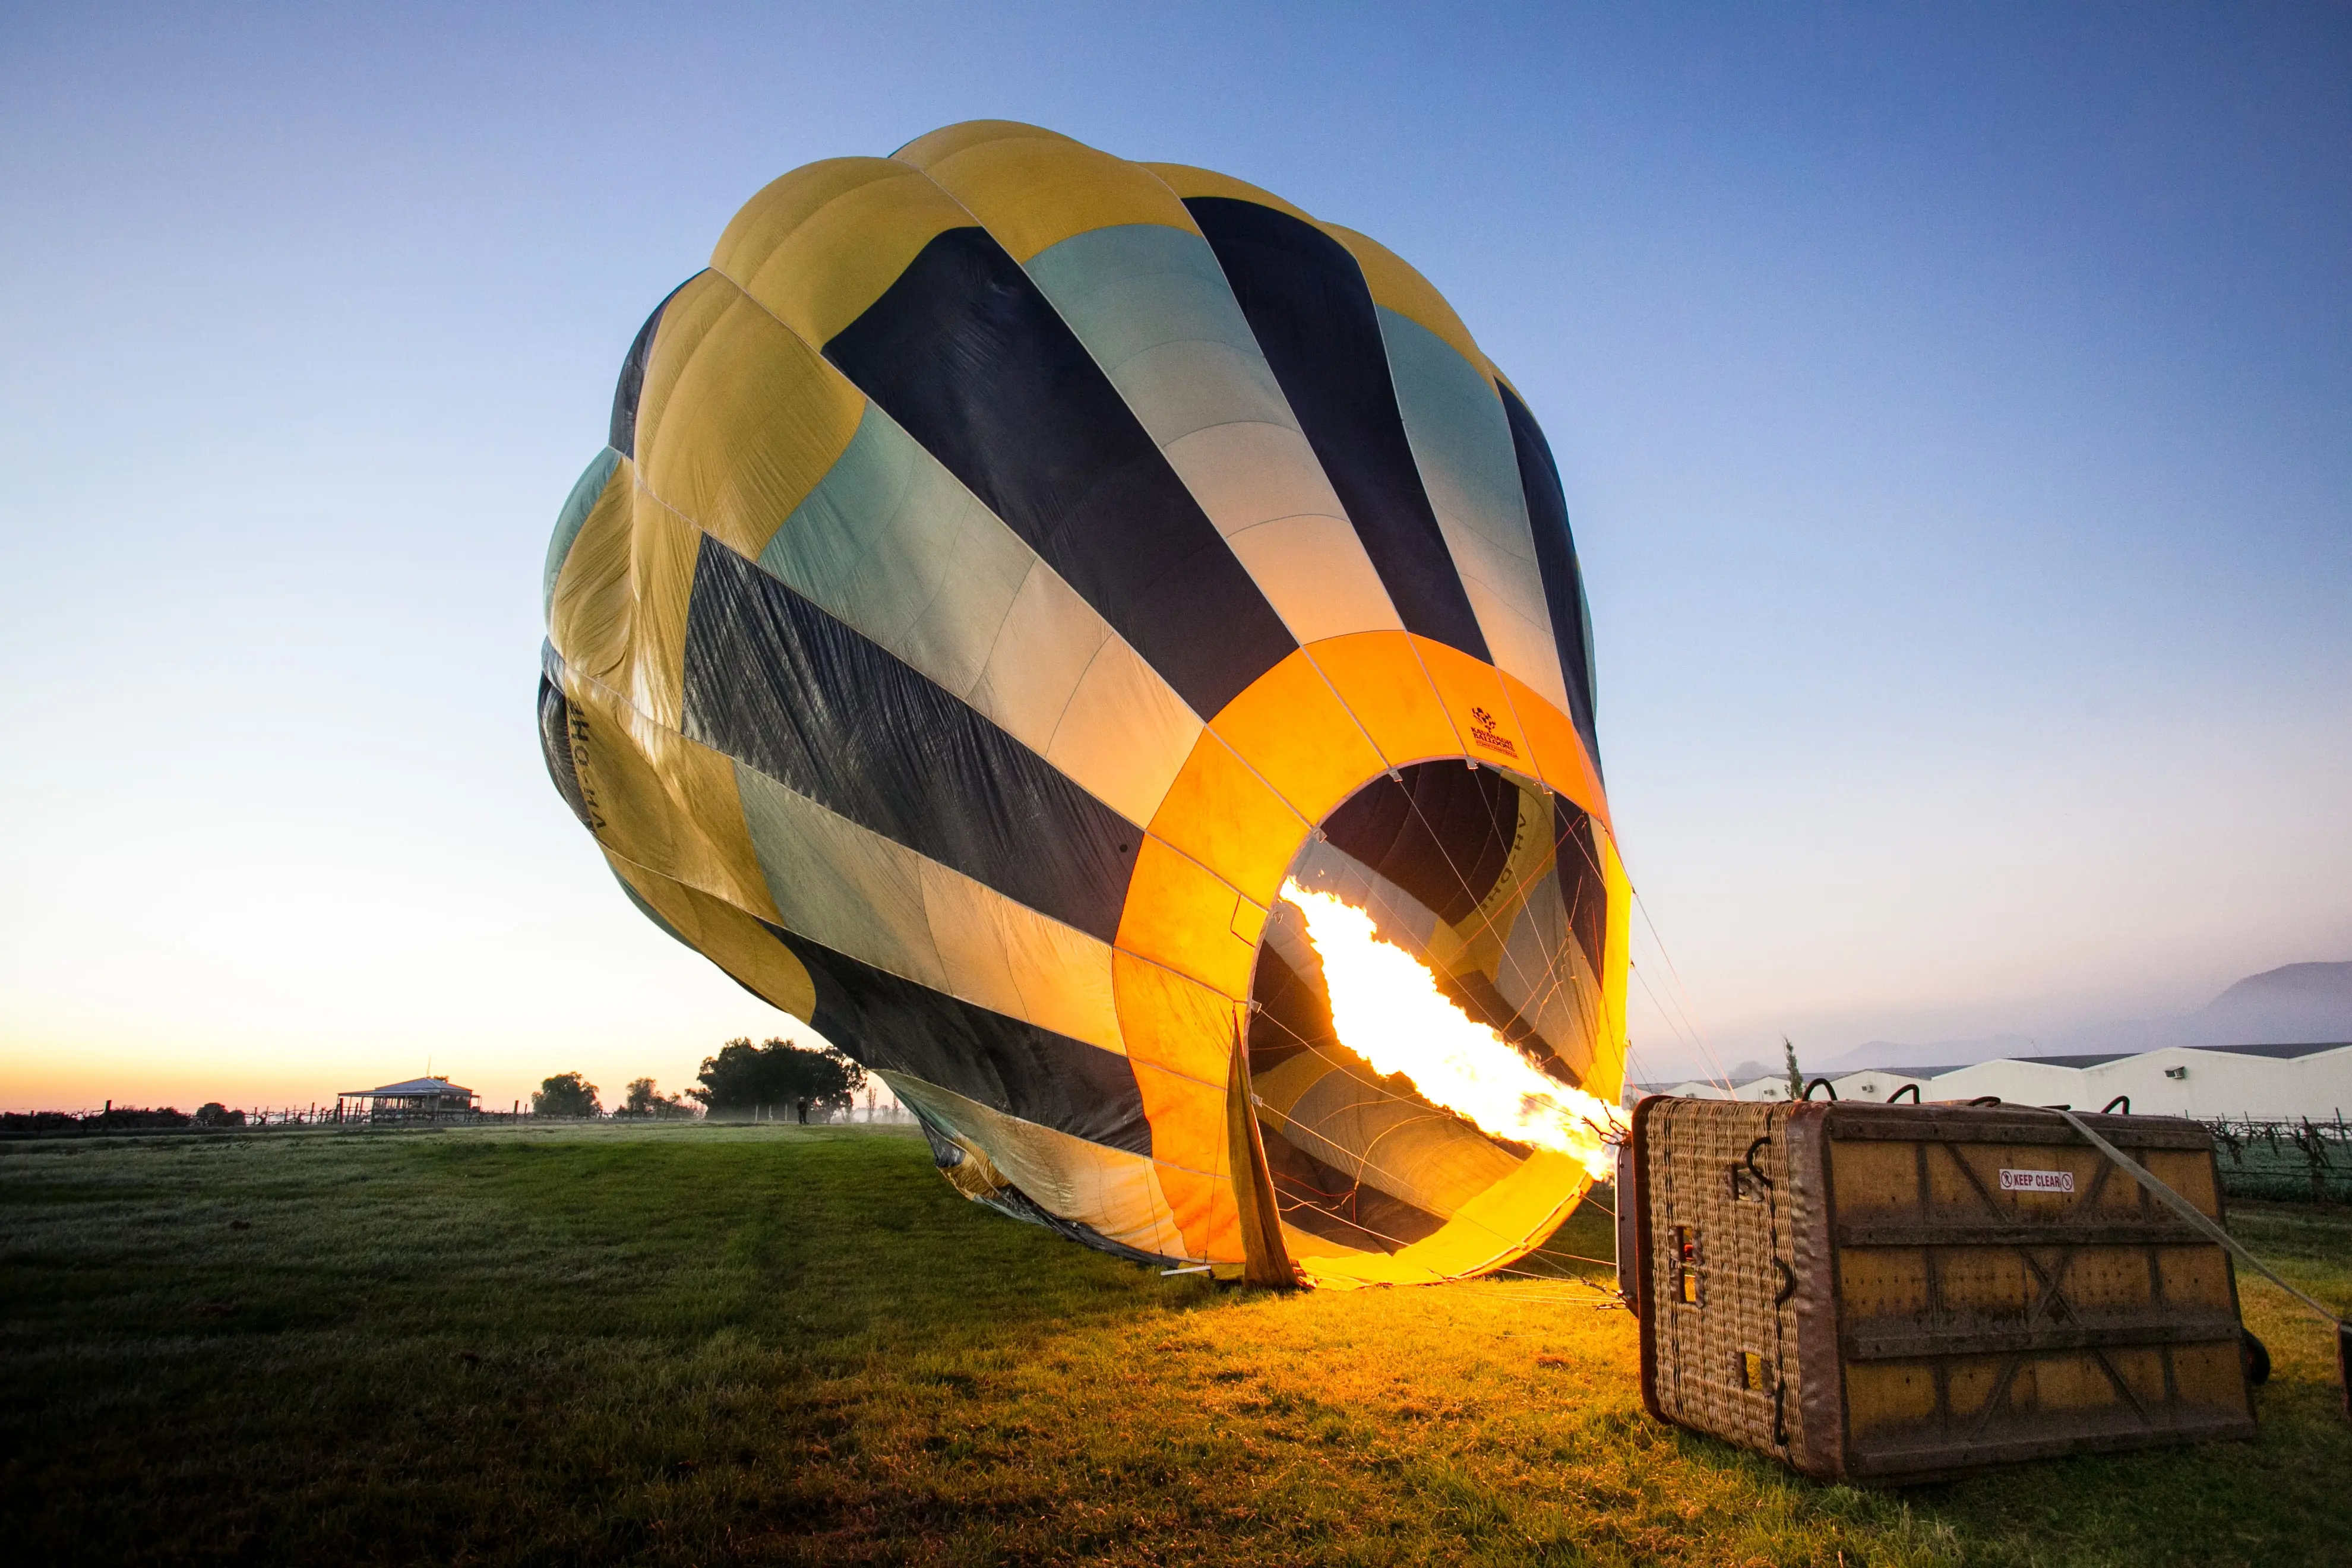 A hot air balloon being inflated to take flight.